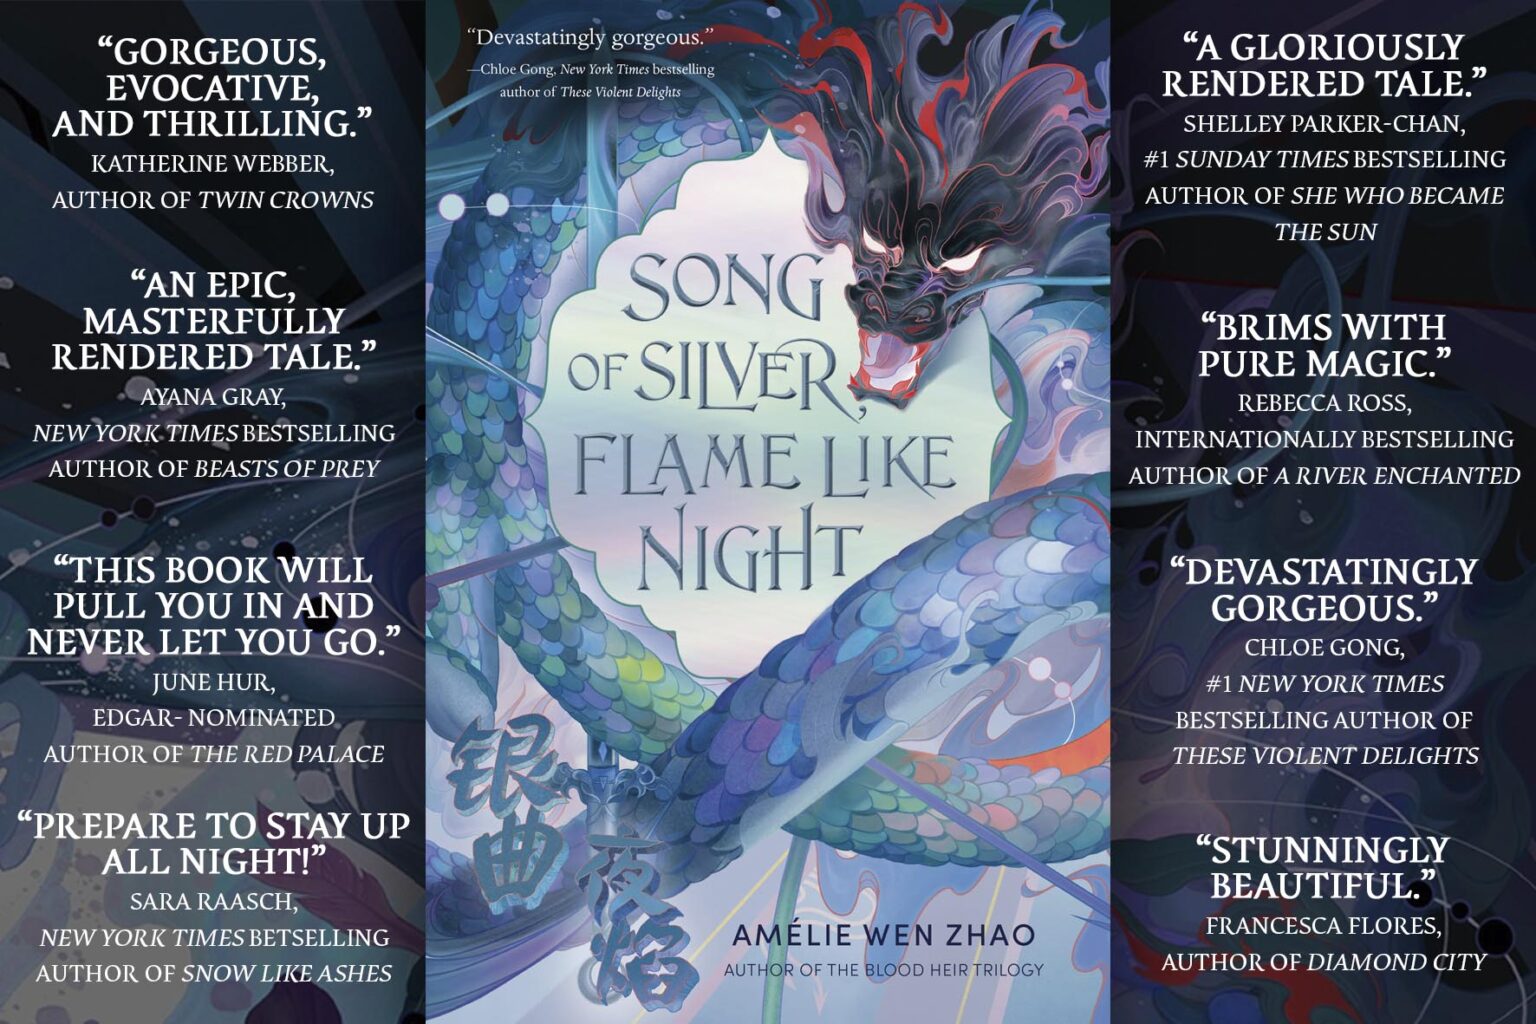 song of silver flame like night by amélie wen zhao